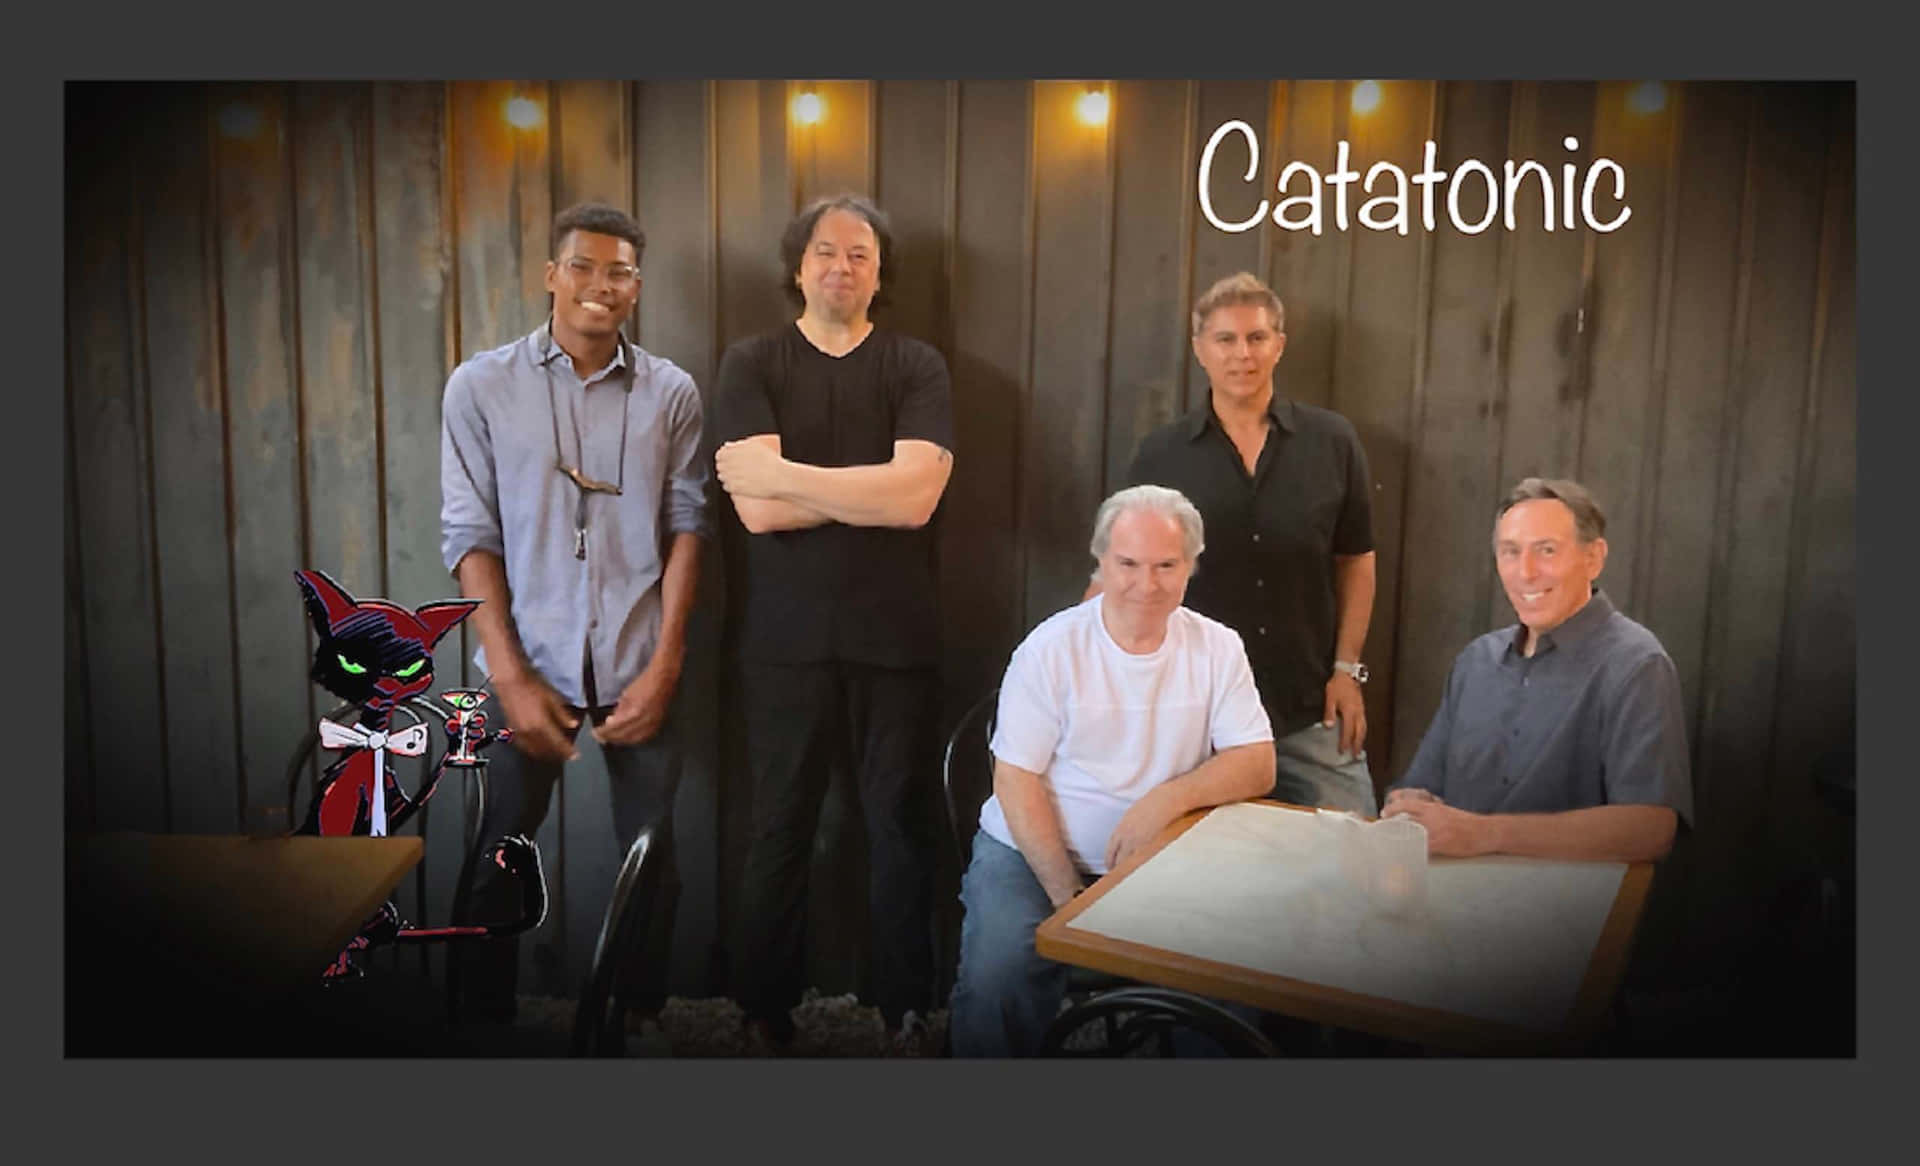 Catatonic - A Group Of Men Standing In Front Of A Table Wallpaper